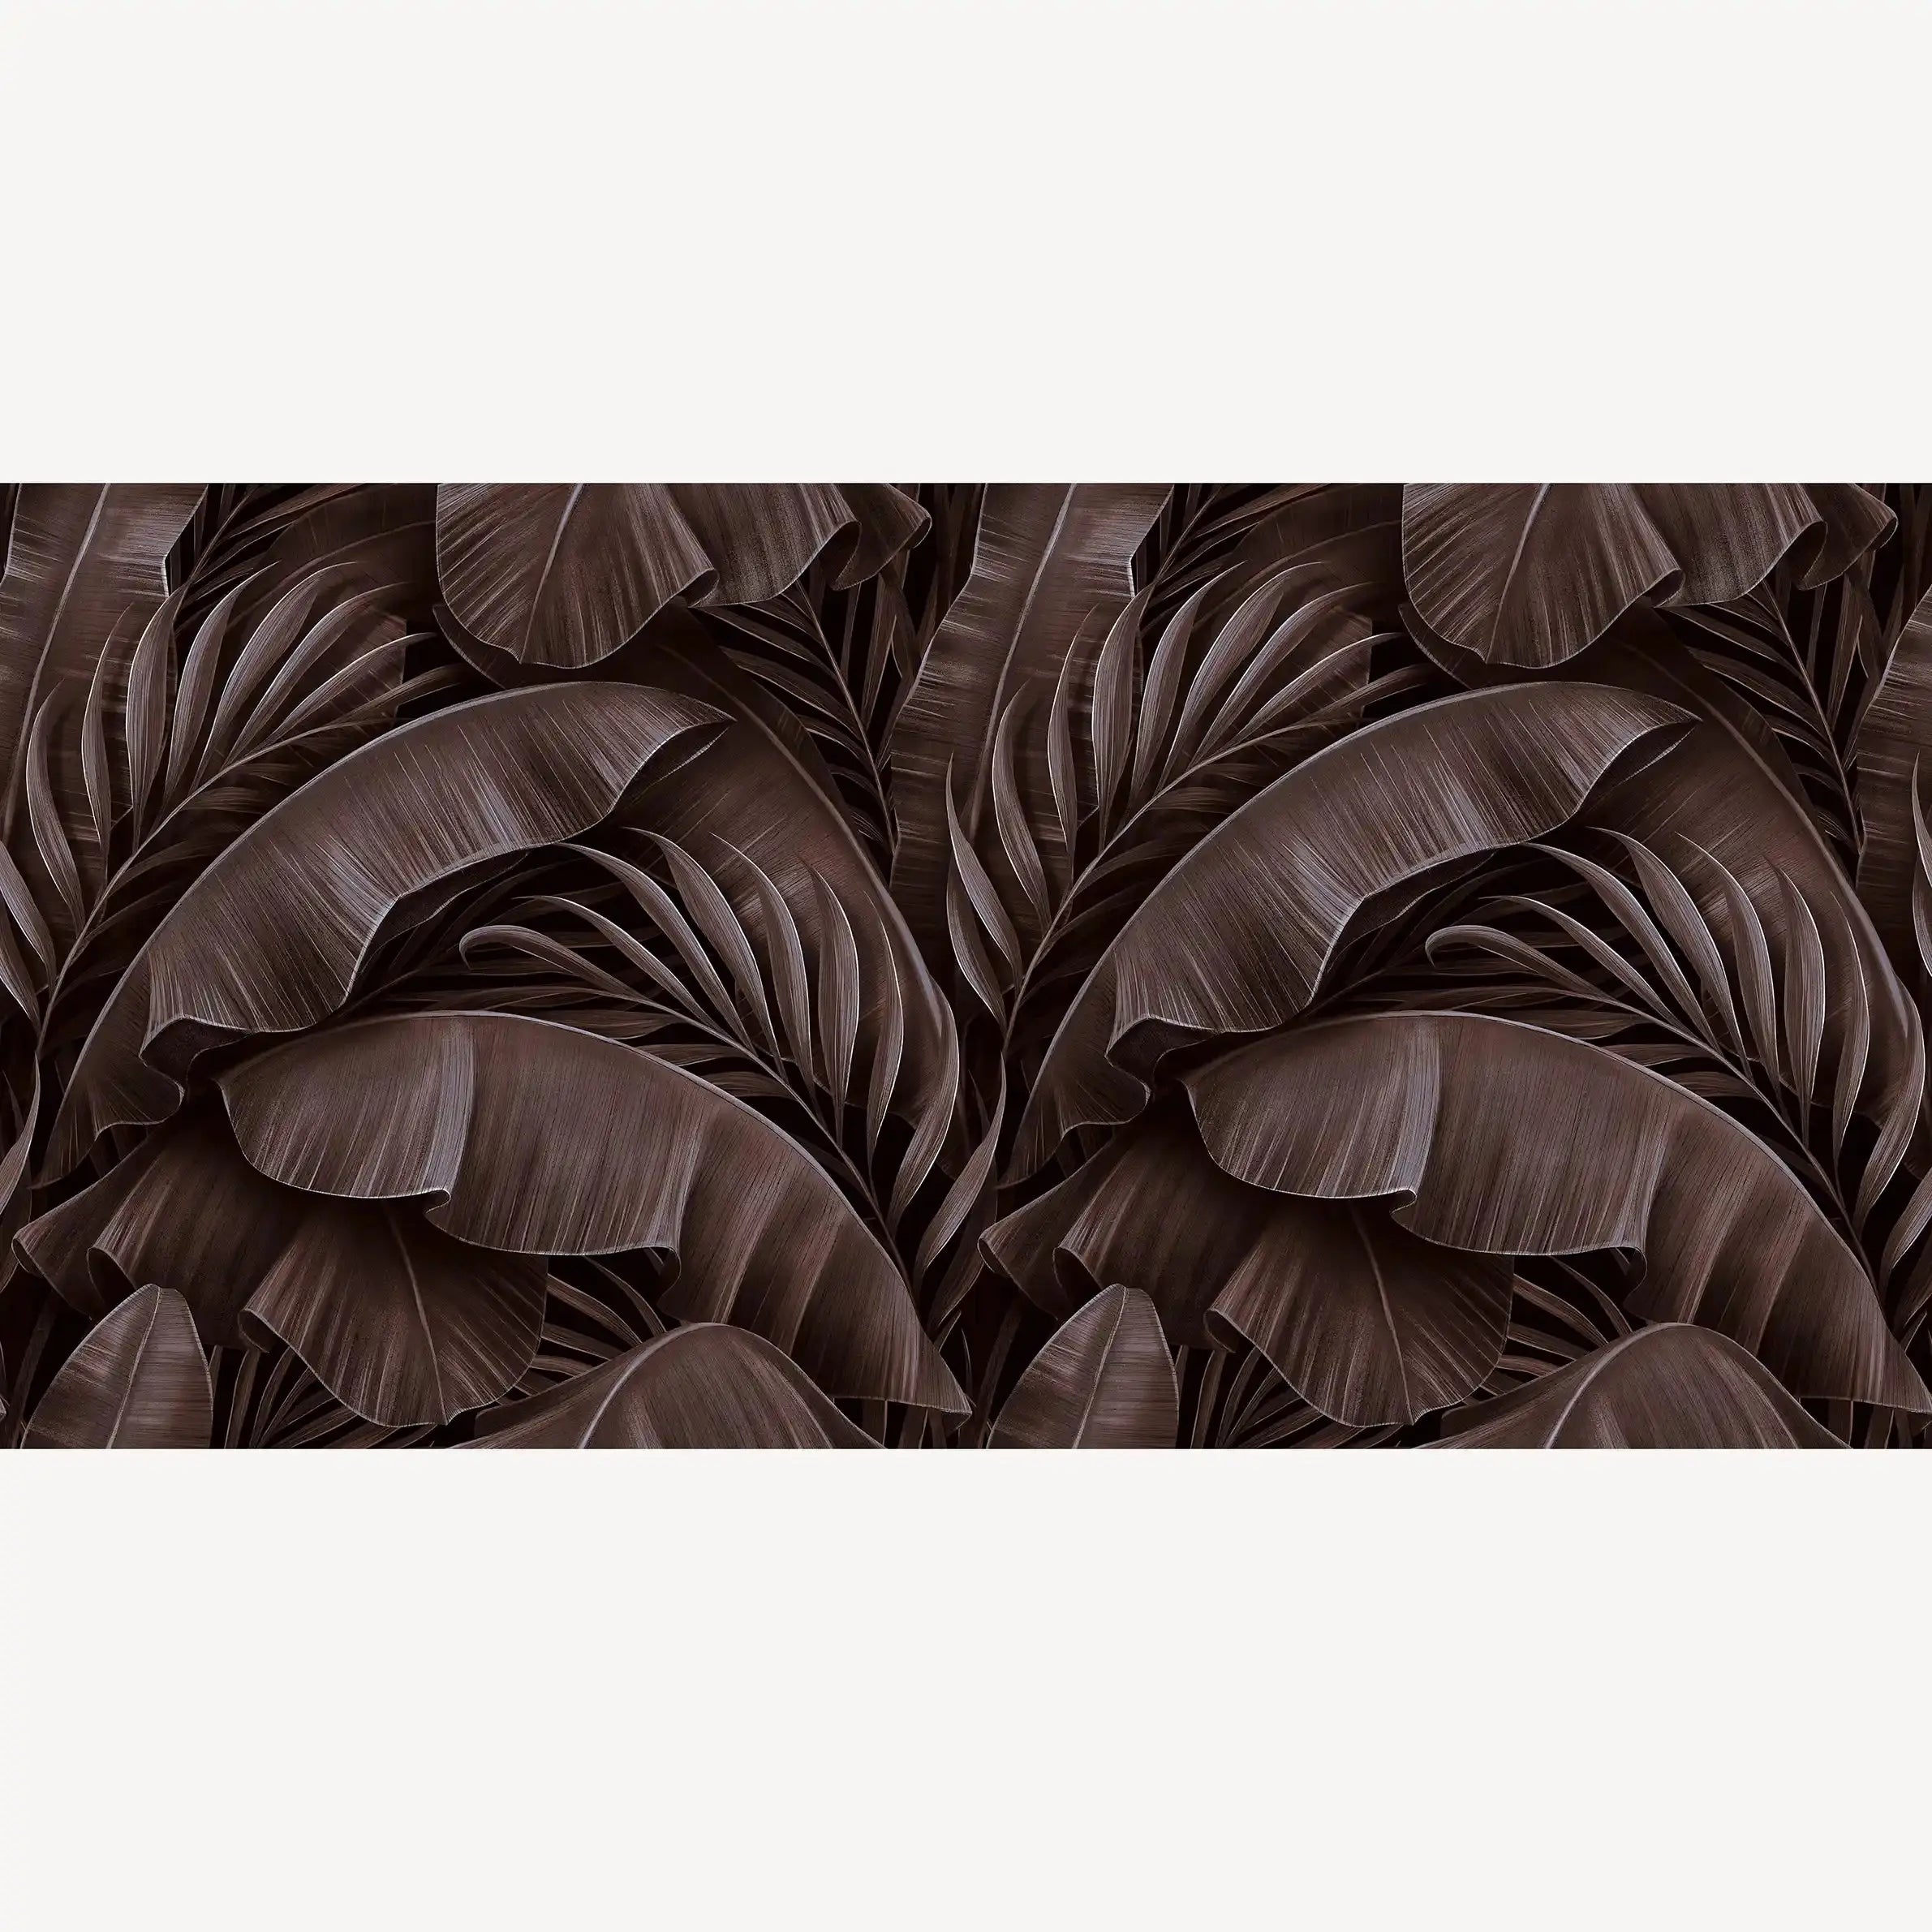 3026-C / Tropical Jungle Leaves Wallpaper, Peel and Stick Mural, Ideal for Bathroom, Bedroom, and Kitchen - Artevella